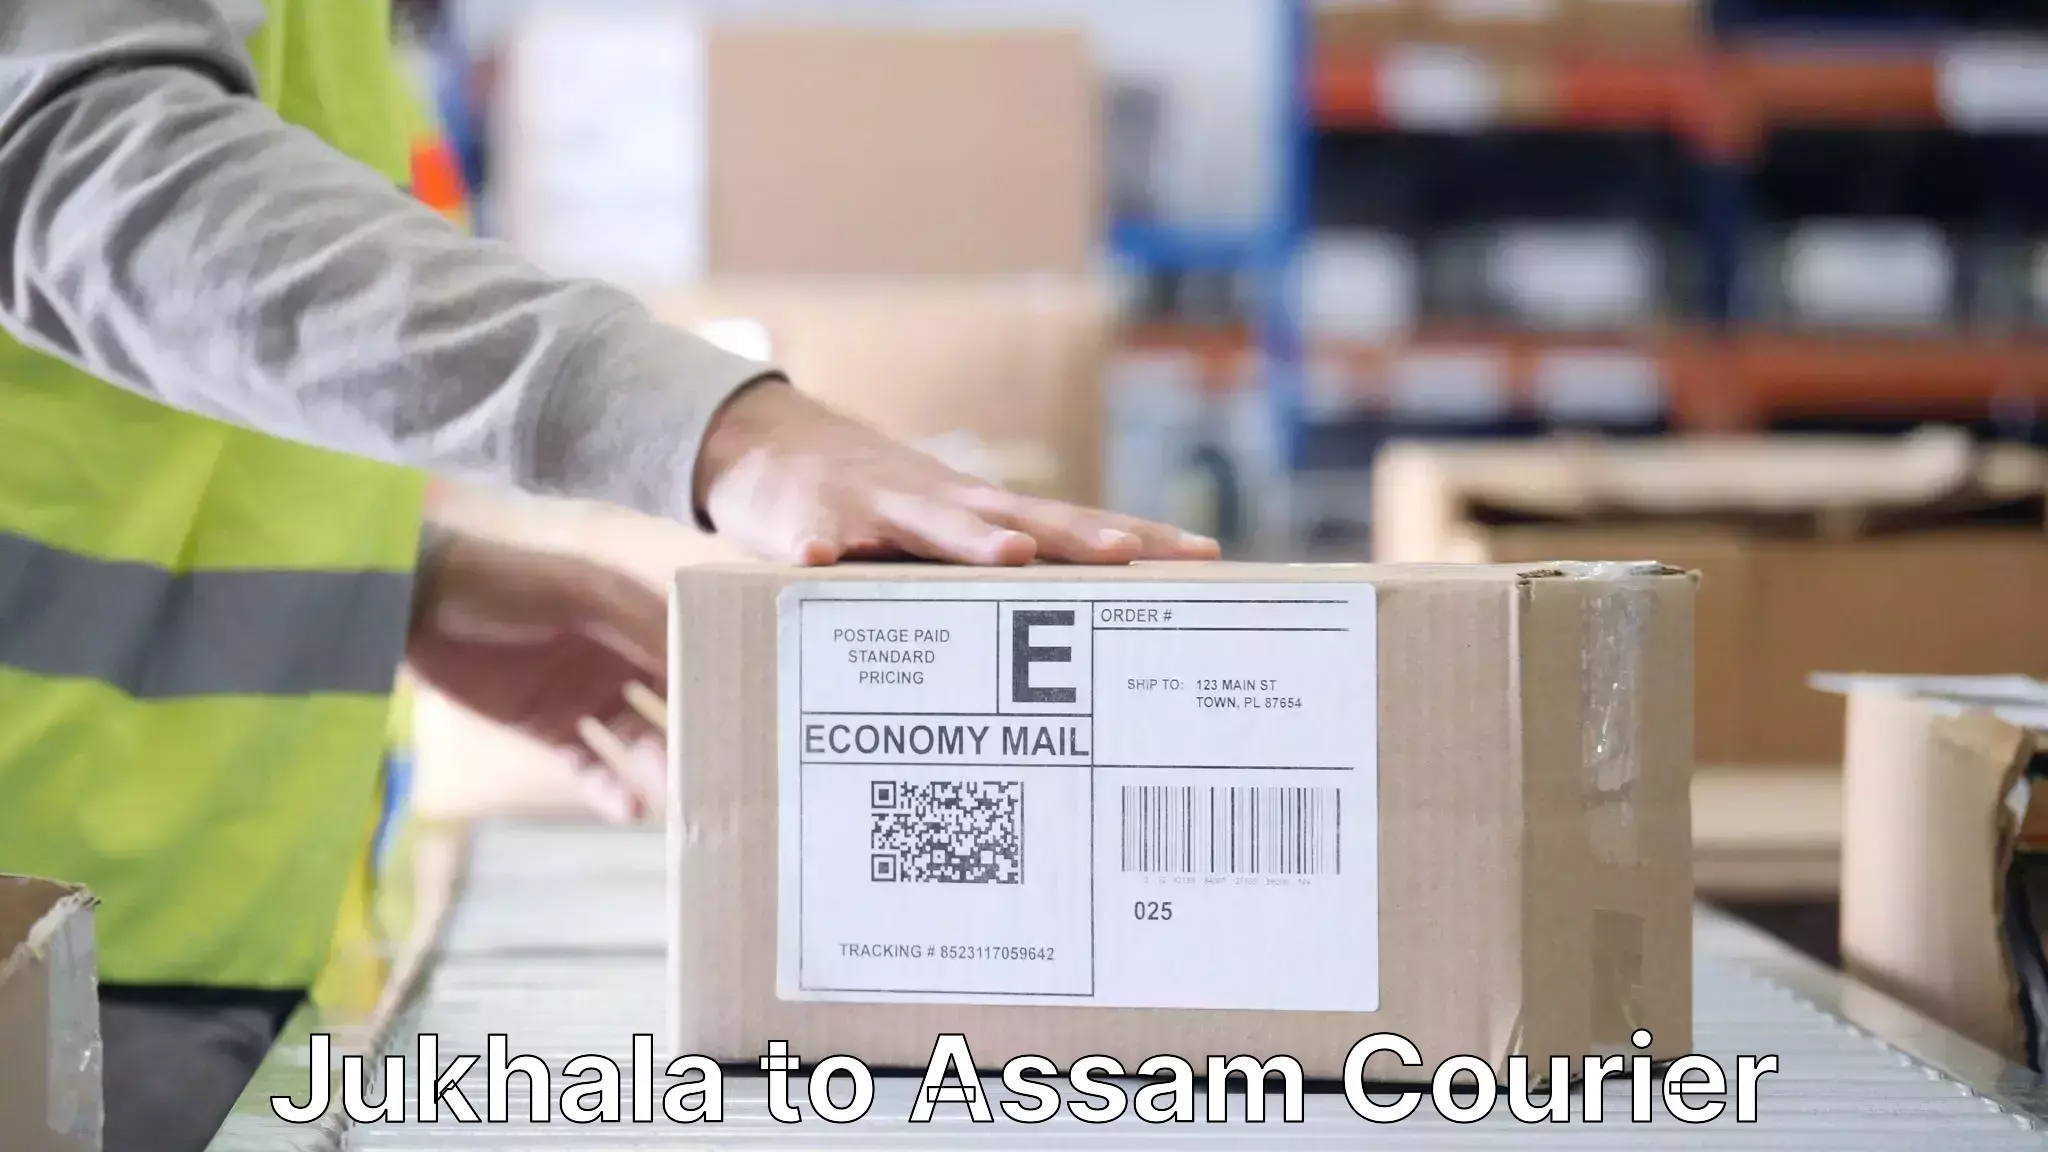 Reliable relocation services Jukhala to Assam